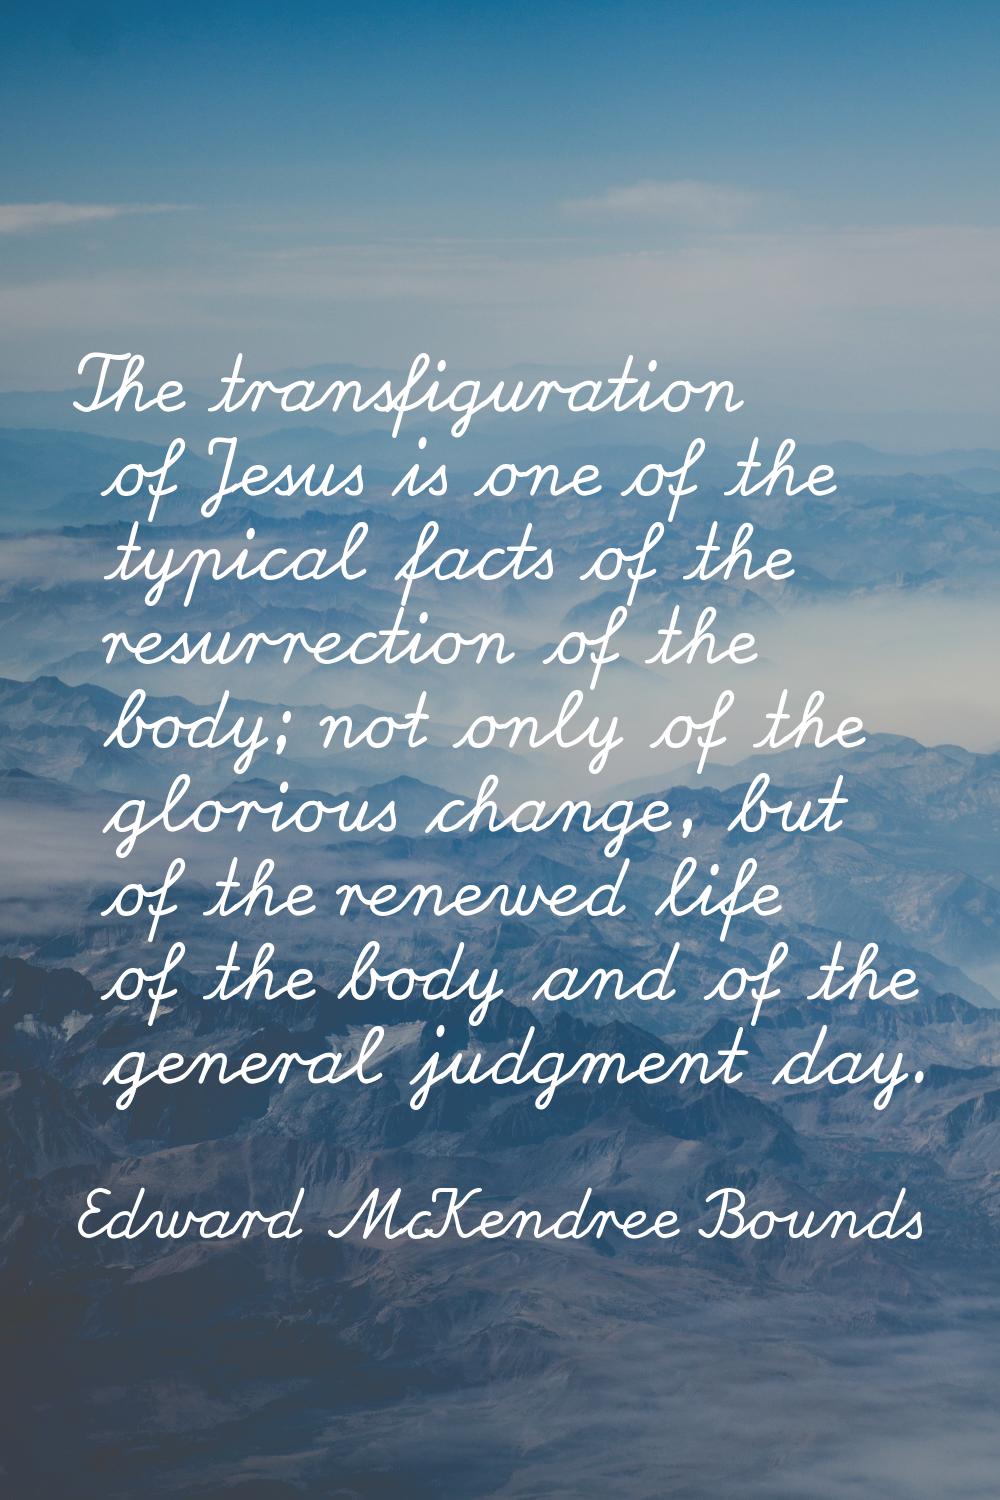 The transfiguration of Jesus is one of the typical facts of the resurrection of the body; not only 